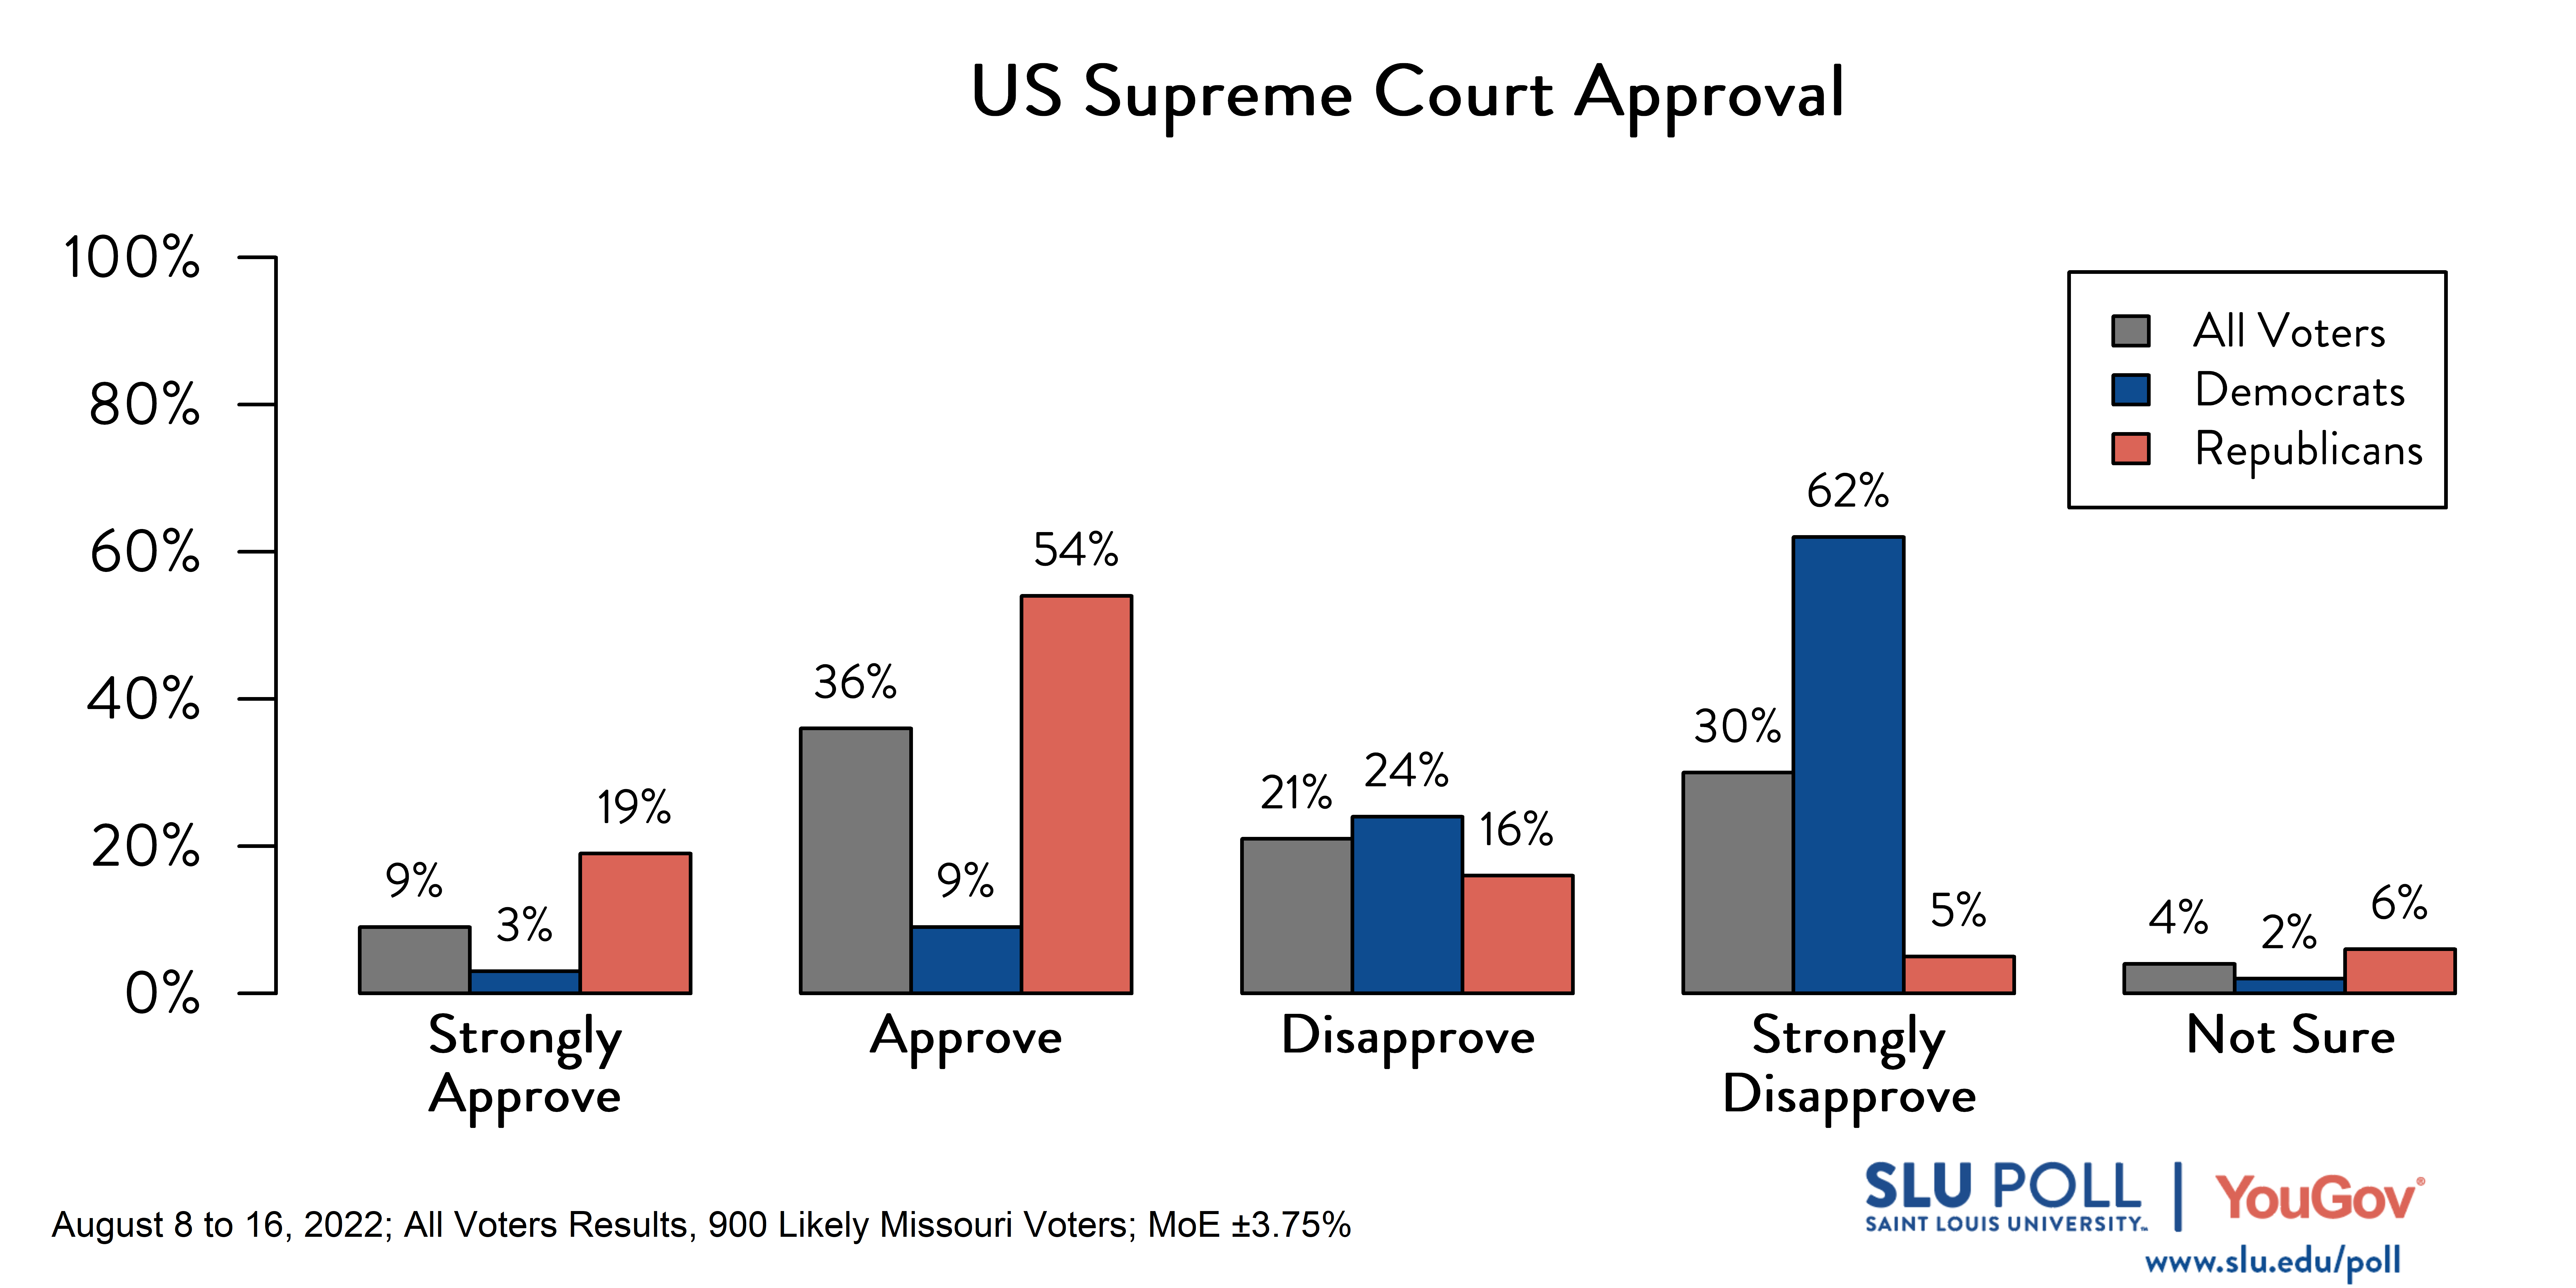 Likely voters' responses to 'Do you approve or disapprove of the way each is doing their job: The US Supreme Court?': 9% Strongly approve, 36% Approve, 21% Disapprove, 30% Strongly disapprove, and 4% Not sure. Democratic voters' responses: ' 3% Strongly approve, 9% Approve, 24% Disapprove, 62% Strongly disapprove, and 2% Not sure. Republican voters' responses: 19% Strongly approve, 54% Approve, 16% Disapprove, 5% Strongly disapprove, and 6% Not sure. 